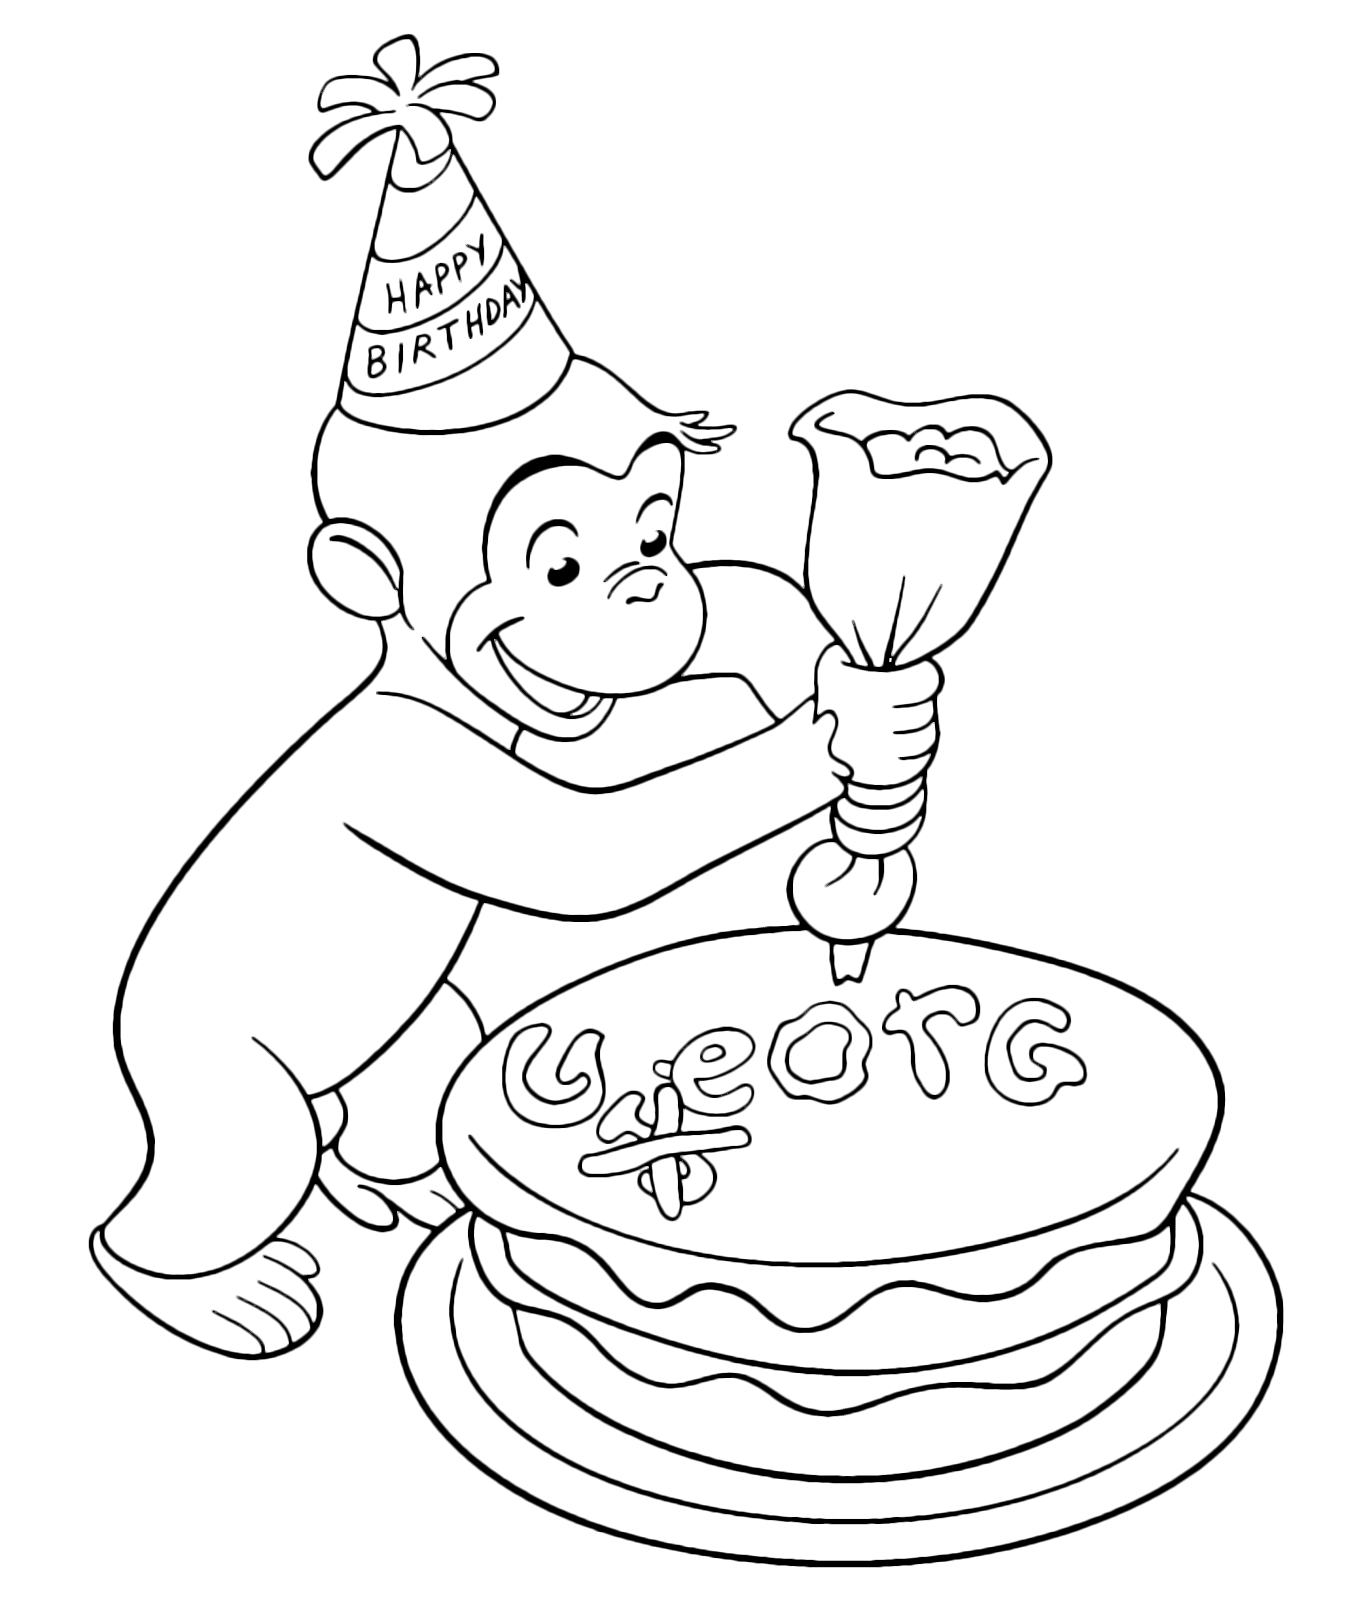 Curious George - George prepares a cake by writing his name on it